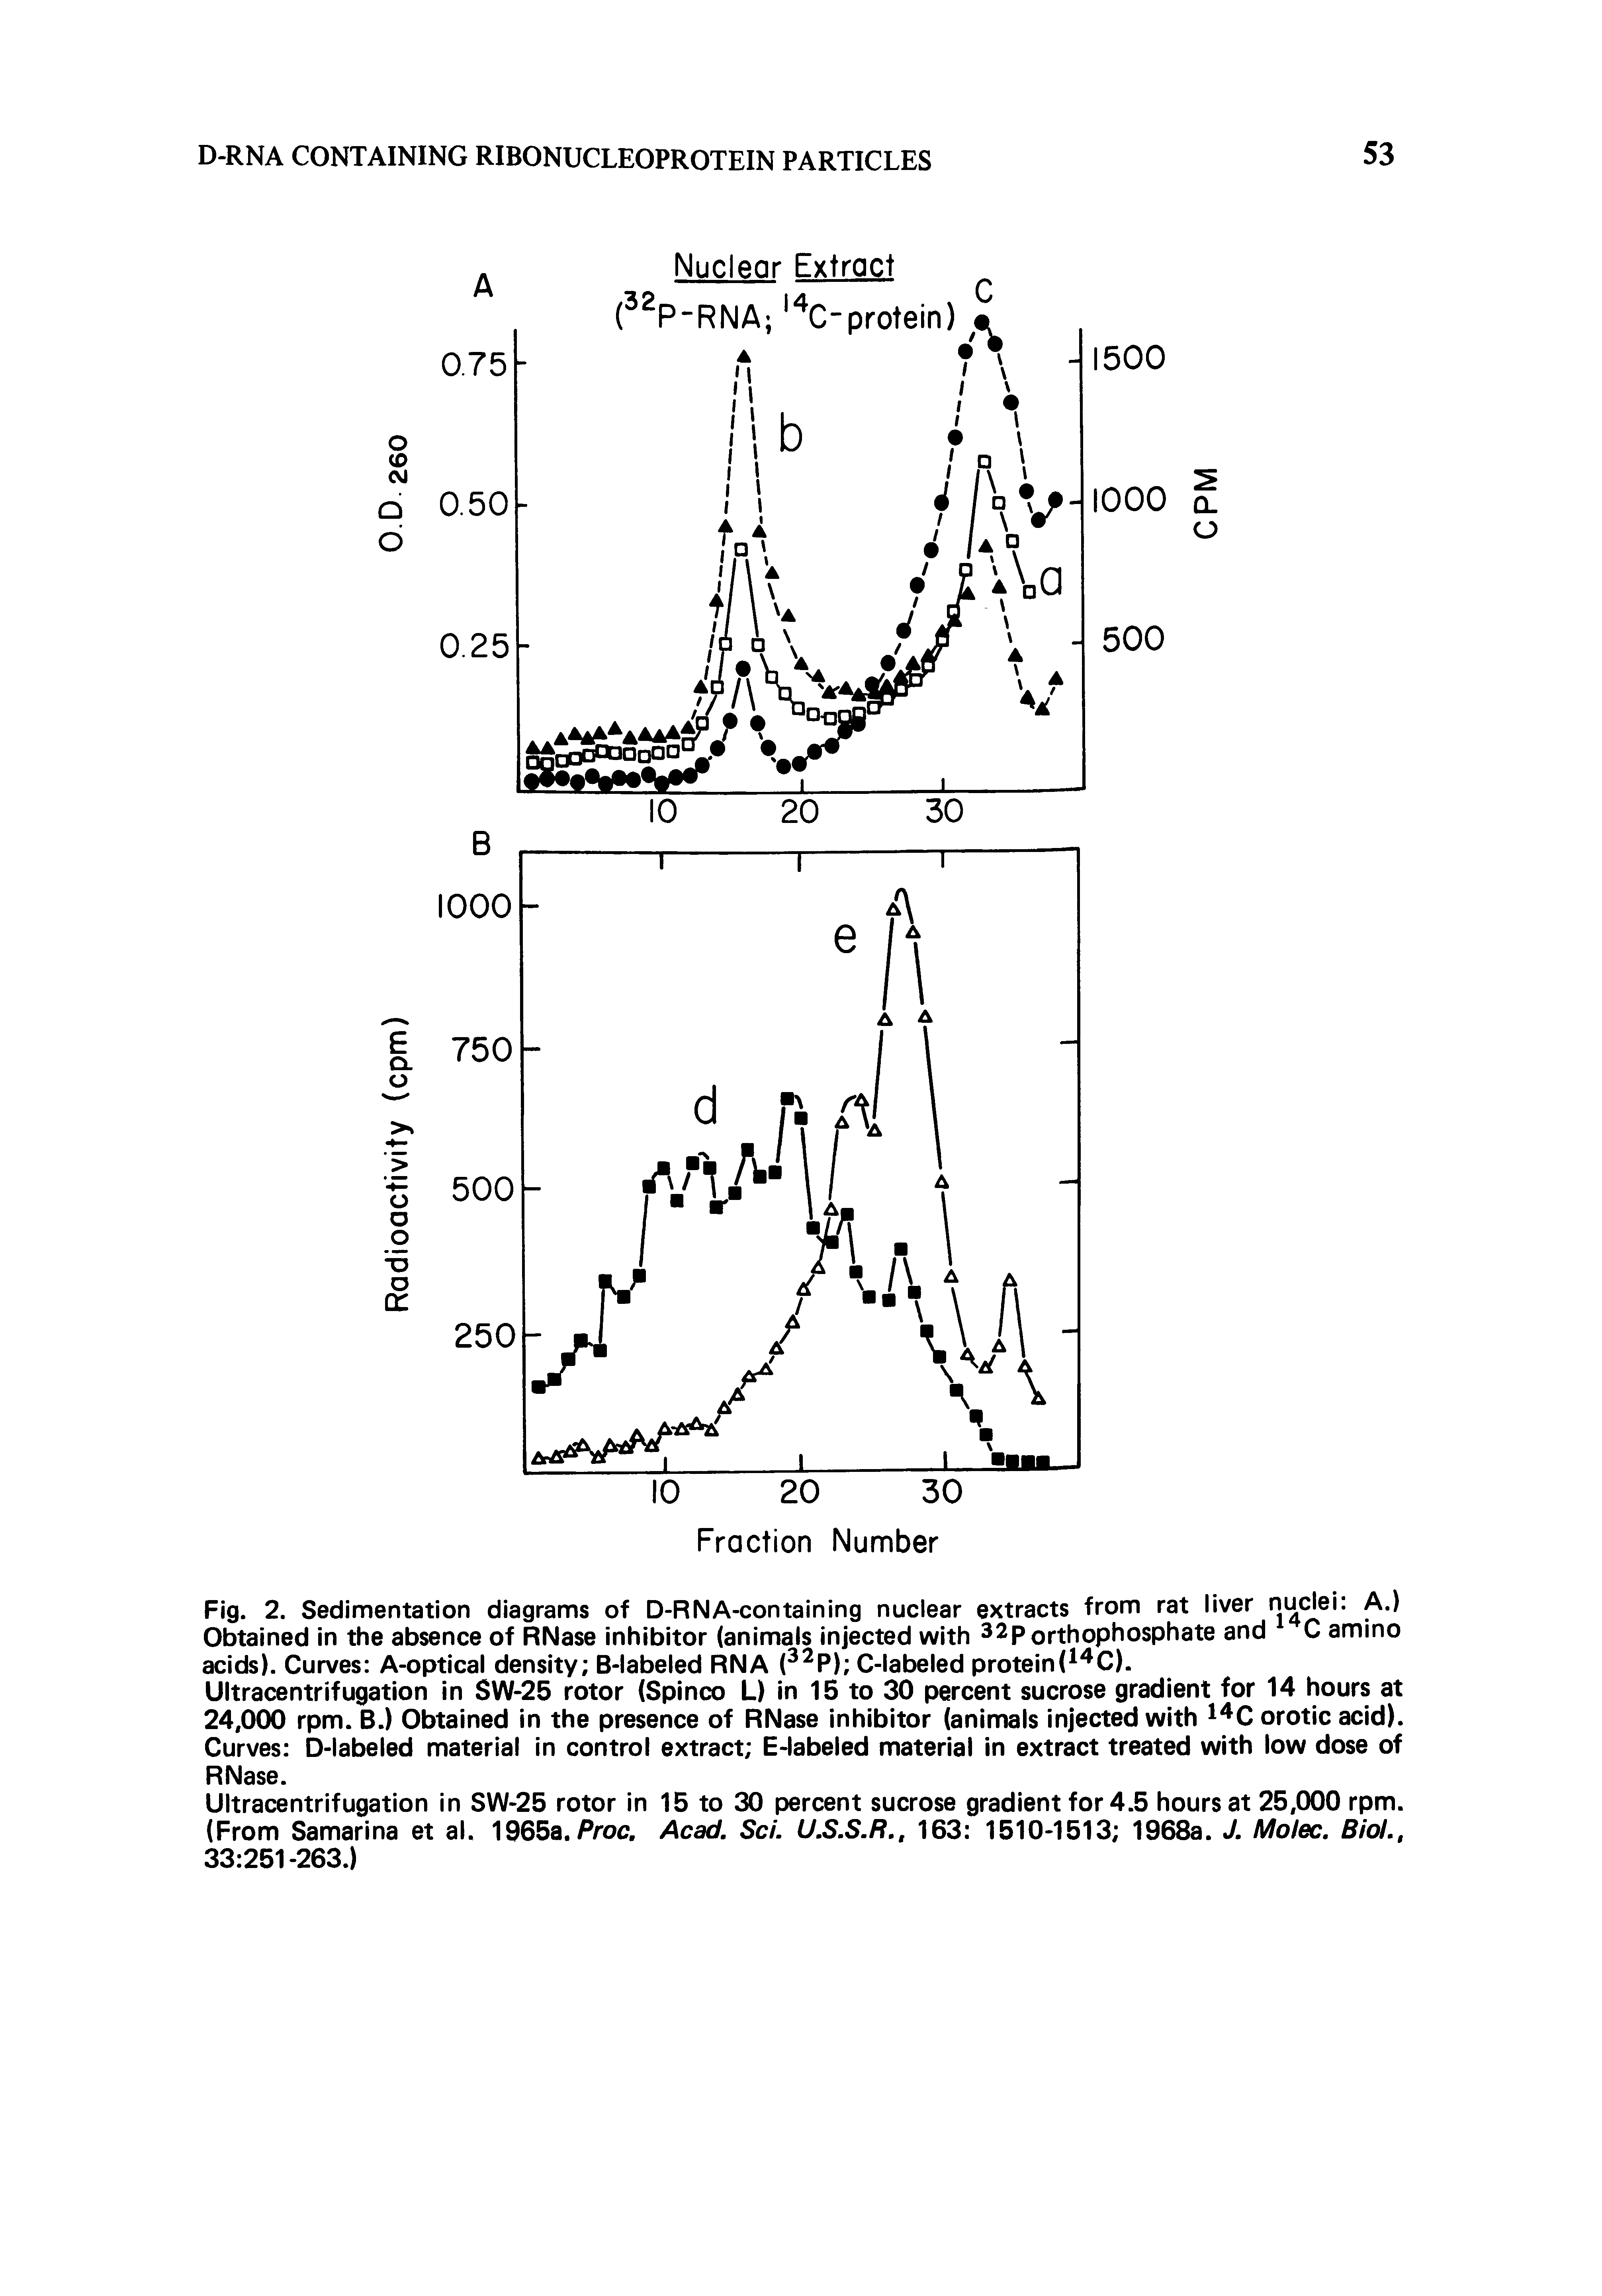 Fig. 2. Sedimentation diagrams of D-RNA-containing nuclear extracts from rat liver nuclei A.) Obtained in the absence of RNase inhibitor (animals injected with 32porthophosphate and C amino acids). Curves A-optical density B-labeled RNA ( P) C-labeled protein( C).